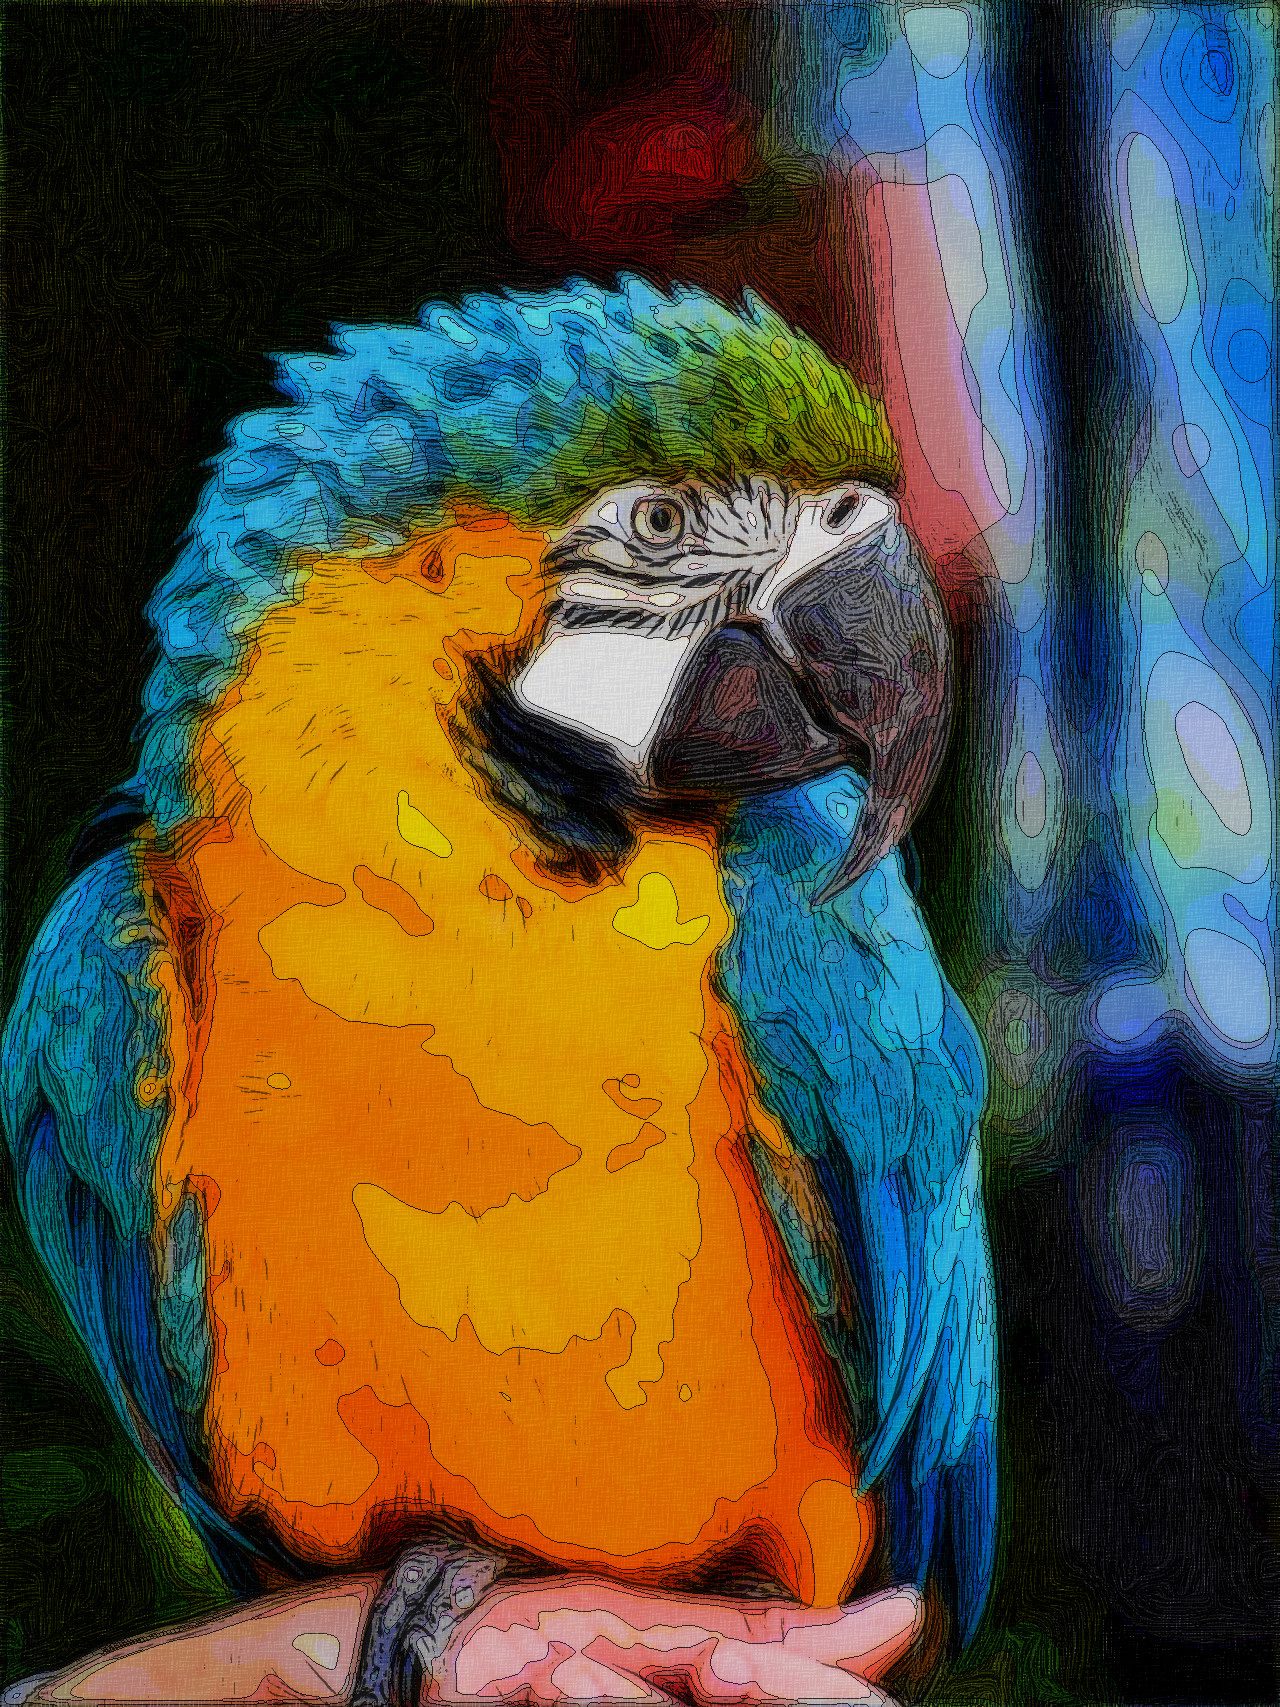 2020-02-03 12-45-41pretty_macaw_by_pegasusimages_ddpnryz-fullview posterized, bordered, engraved using 9 colours and option=Edges.jpg